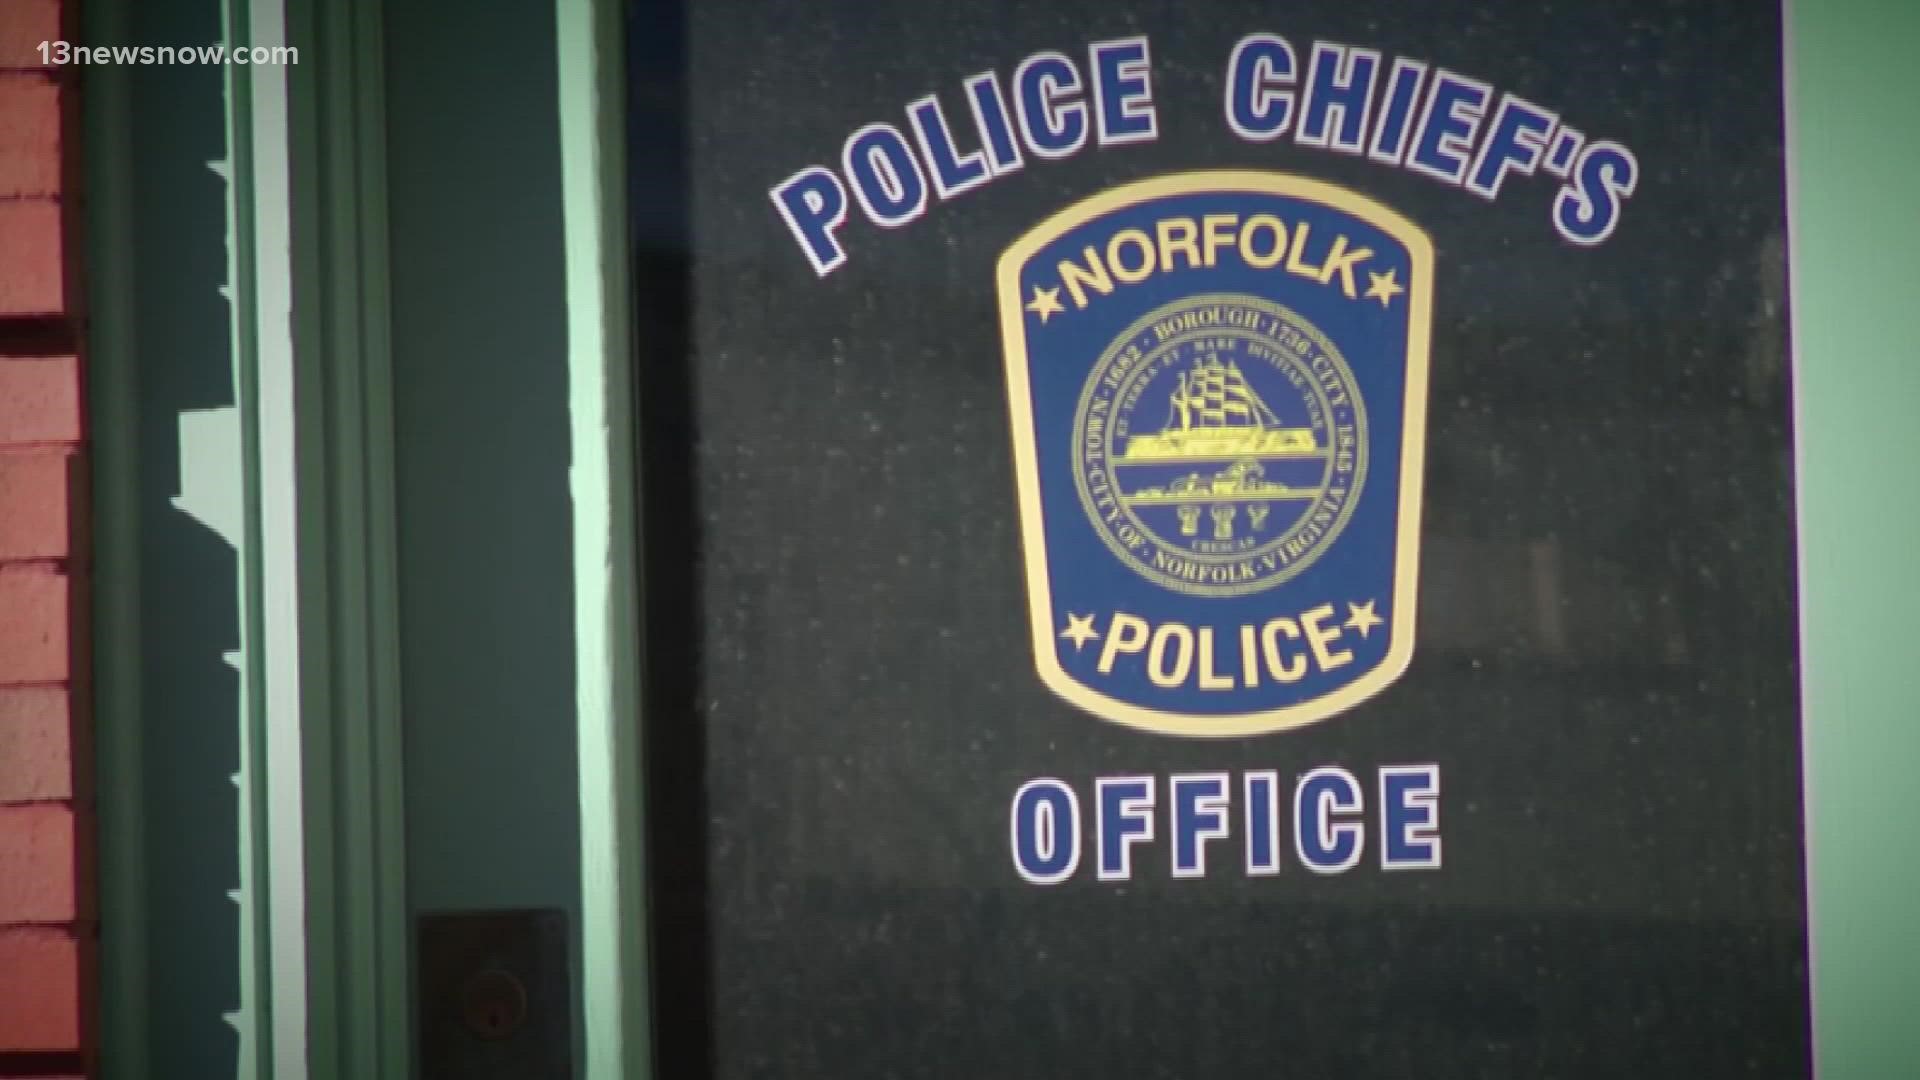 It has been more than six months since Norfolk Police Chief Larry Boone abruptly retired, and the city is pushing ahead to find a permanent replacement.